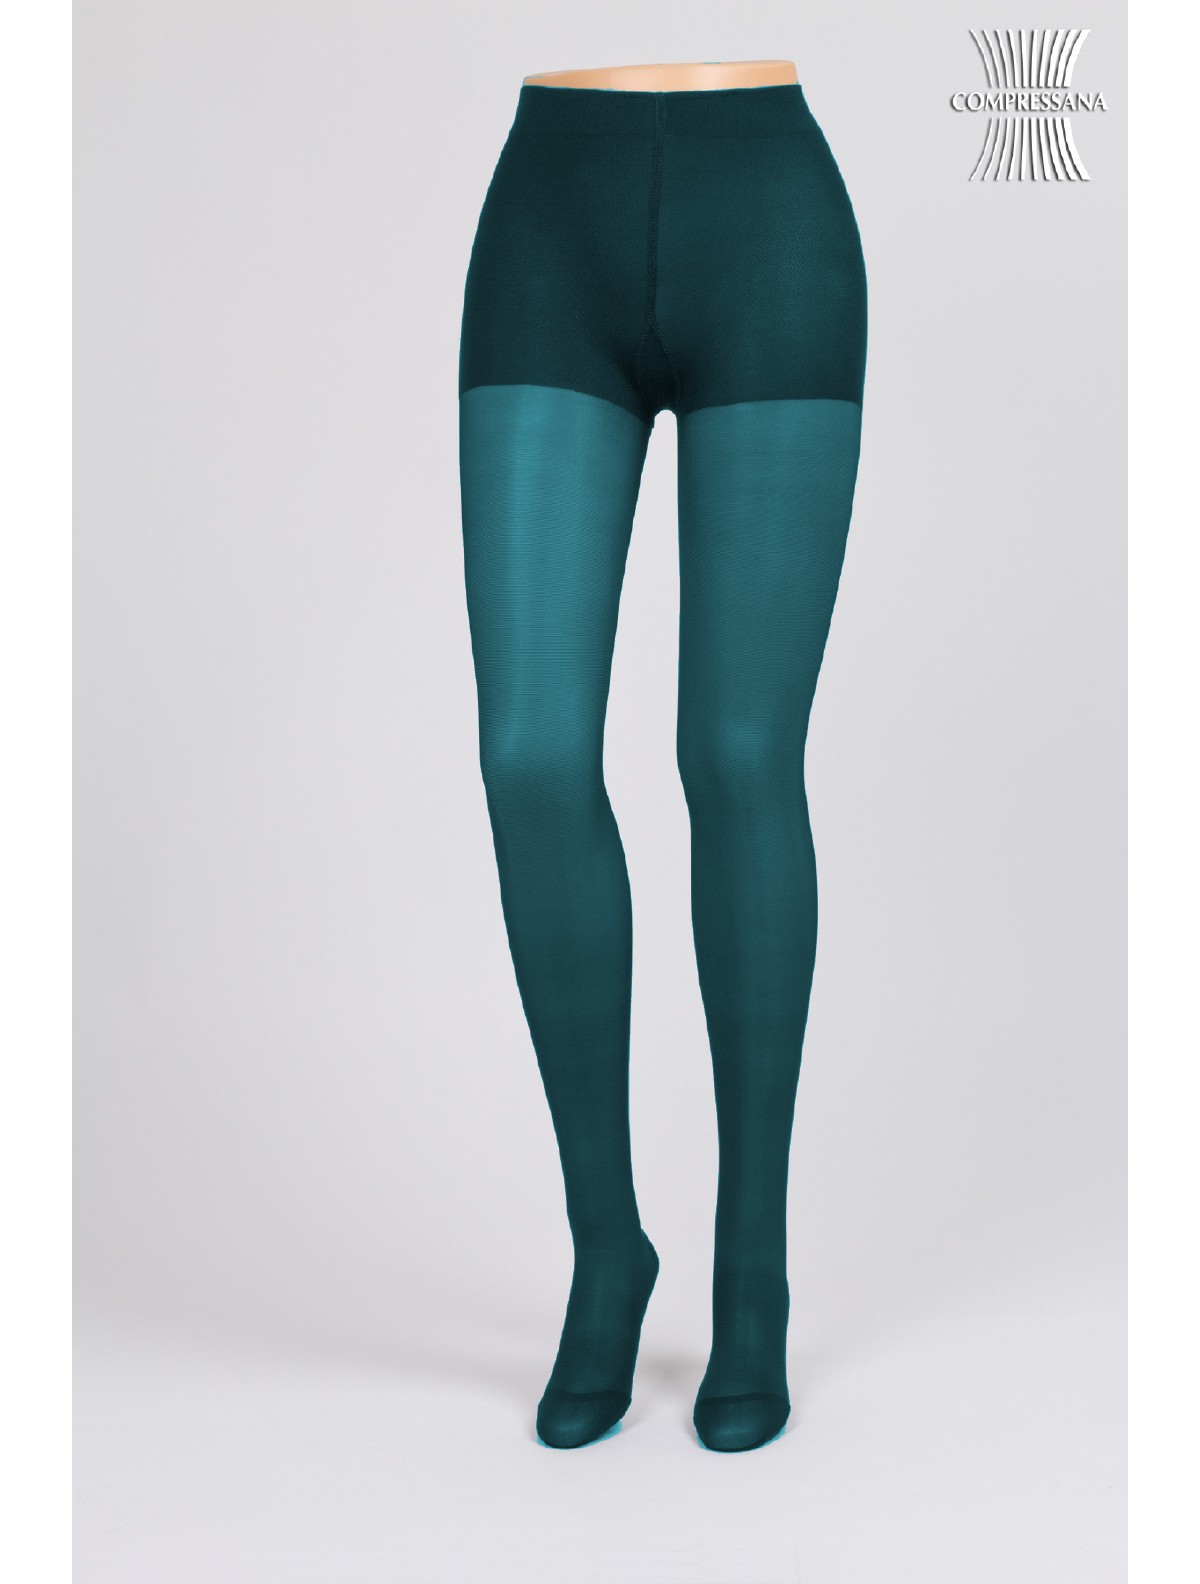 Calypso Tights Strong Compressana Support 140